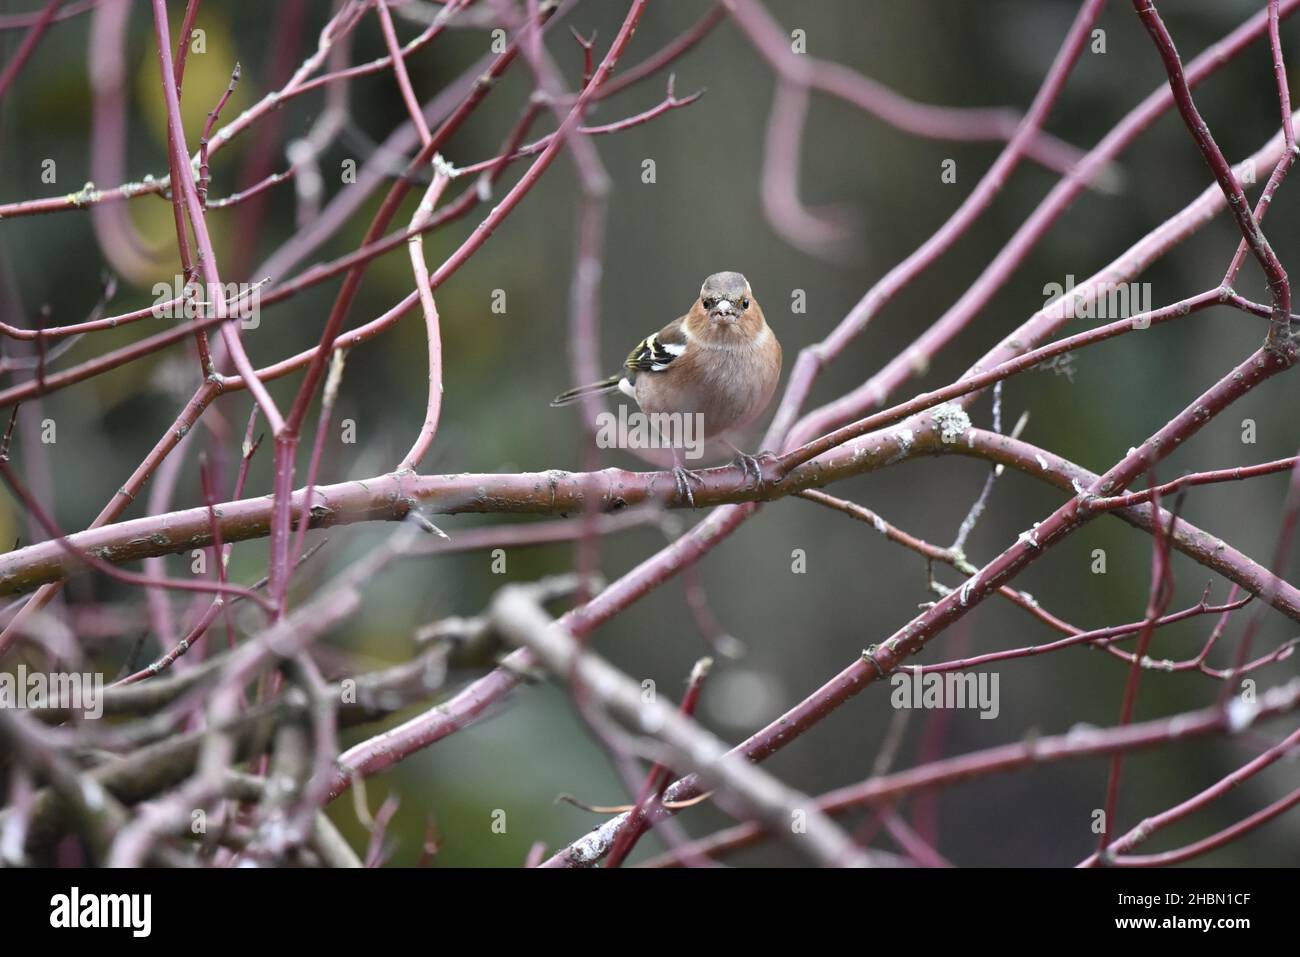 Image of a Male Common Chaffinch (Fringilla coelebs) Perched on a Horizontal Red Dogwood Branch, Facing Camera with Beak Slightly Open, in Nov in UK Stock Photo